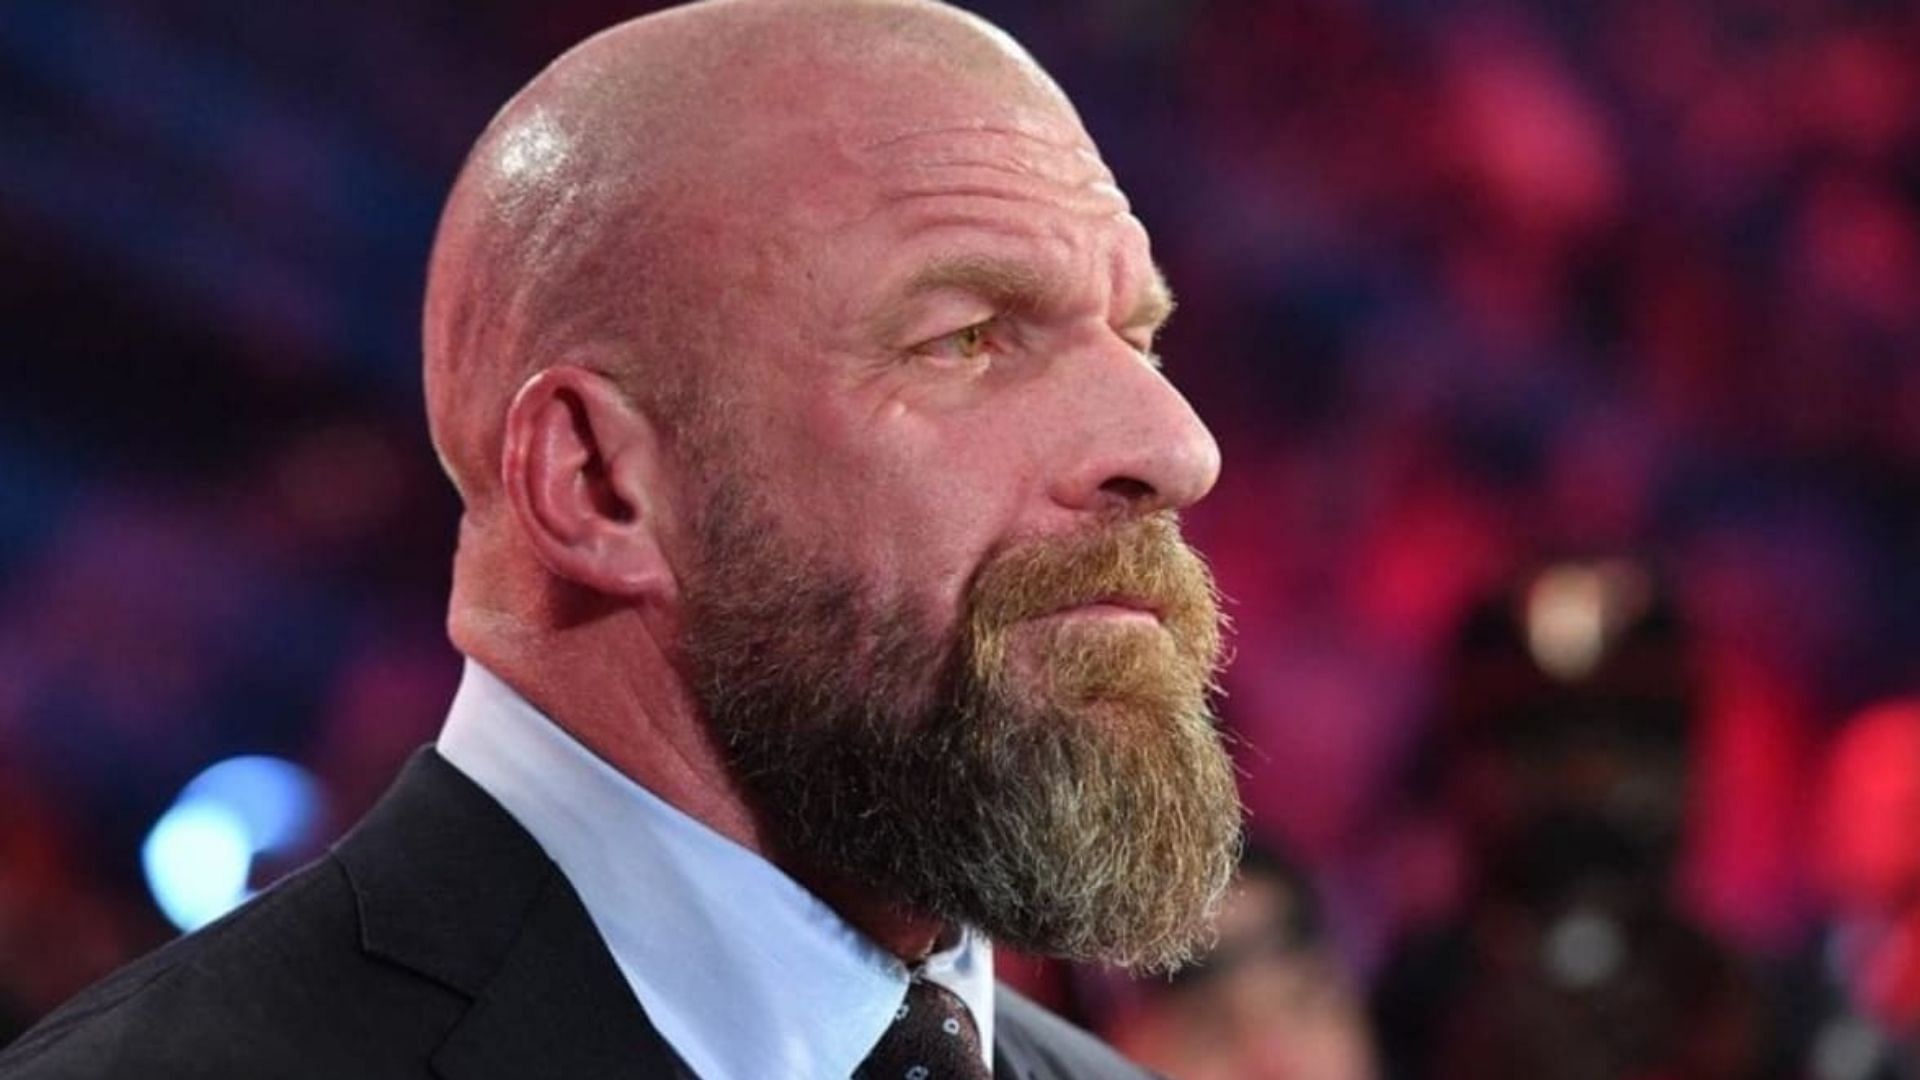 Triple H is now the Head of Creative for WWE